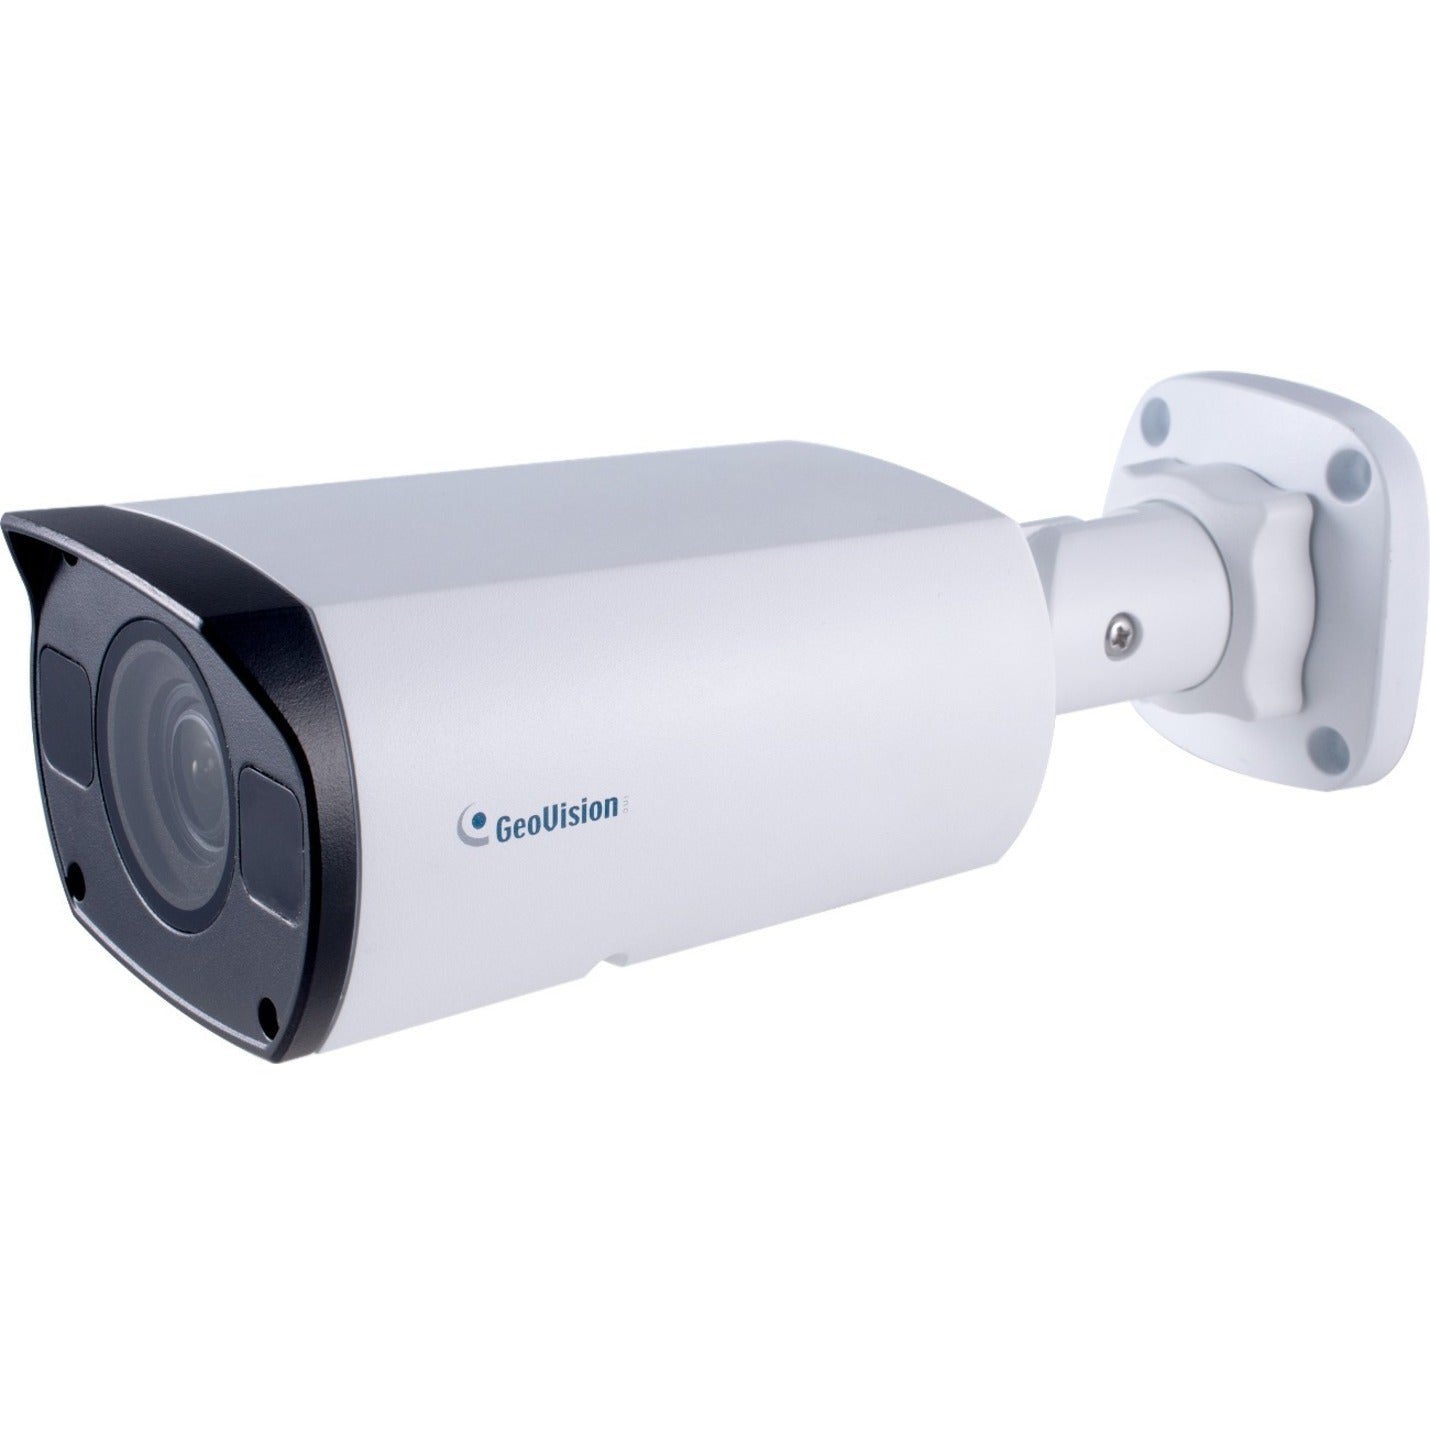 GeoVision GV-TBL8810 8MP Bullet Network Camera, 4.3x Zoom, Super Low Lux, WDR Pro, IR, H.265